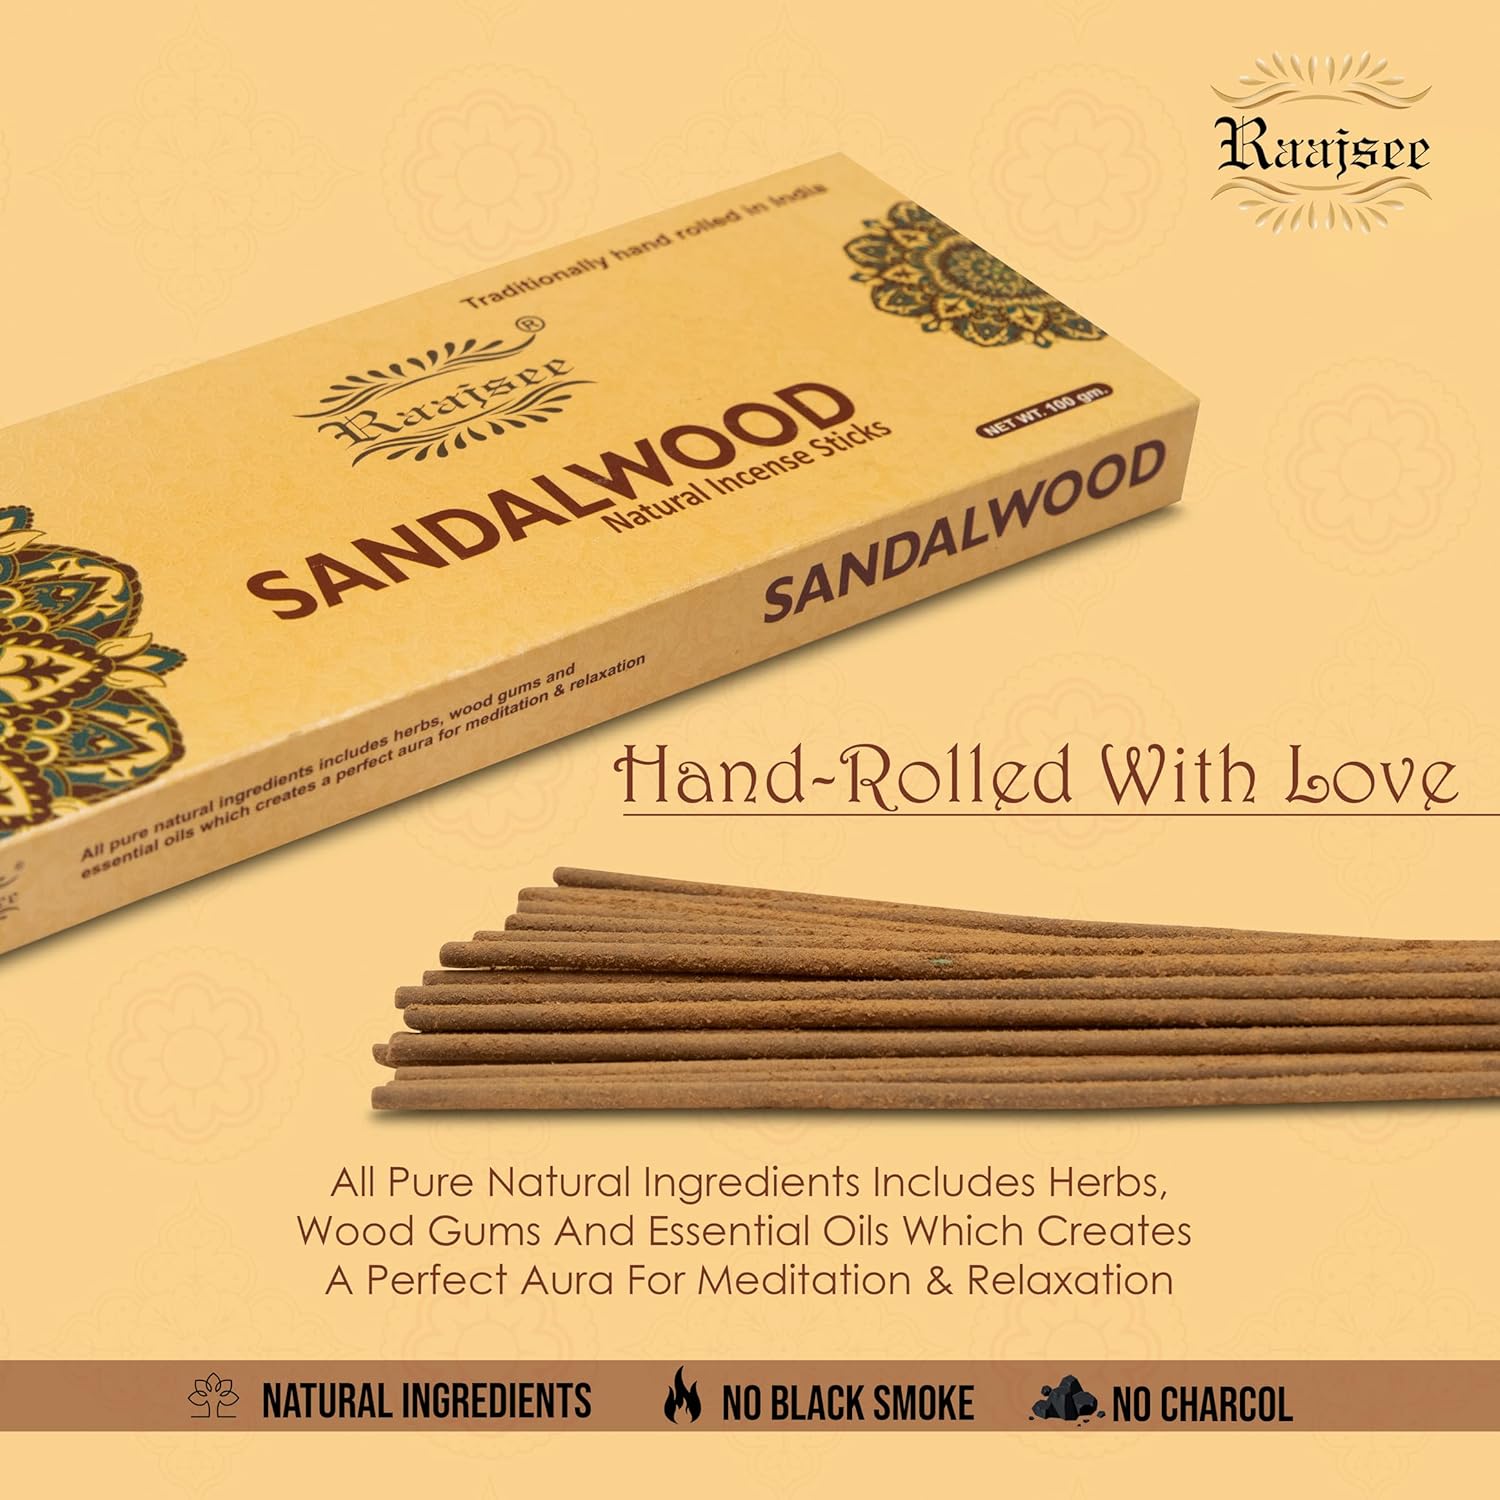 Raajsee Sandalwood Incense Sticks 100 Gm Pack-100% Pure Organic Natural Hand Rolled Free from Chemicals-for Church,Aroma Therapy,Relaxation,Meditation  Sensual Therapy